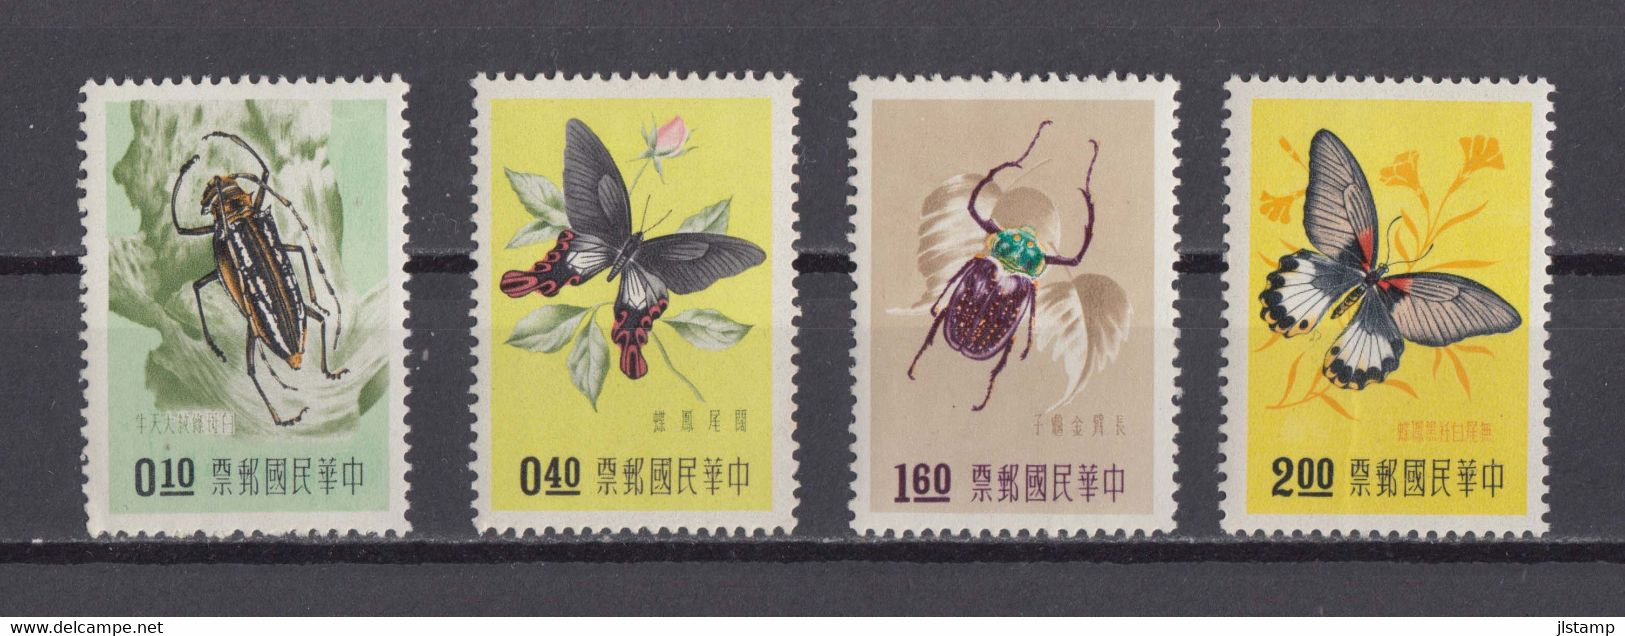 China Taiwan 1958 Insect And Butterfly Stamps 4v,Scott# 1183-1188,OG,MNH,VF - Nuovi